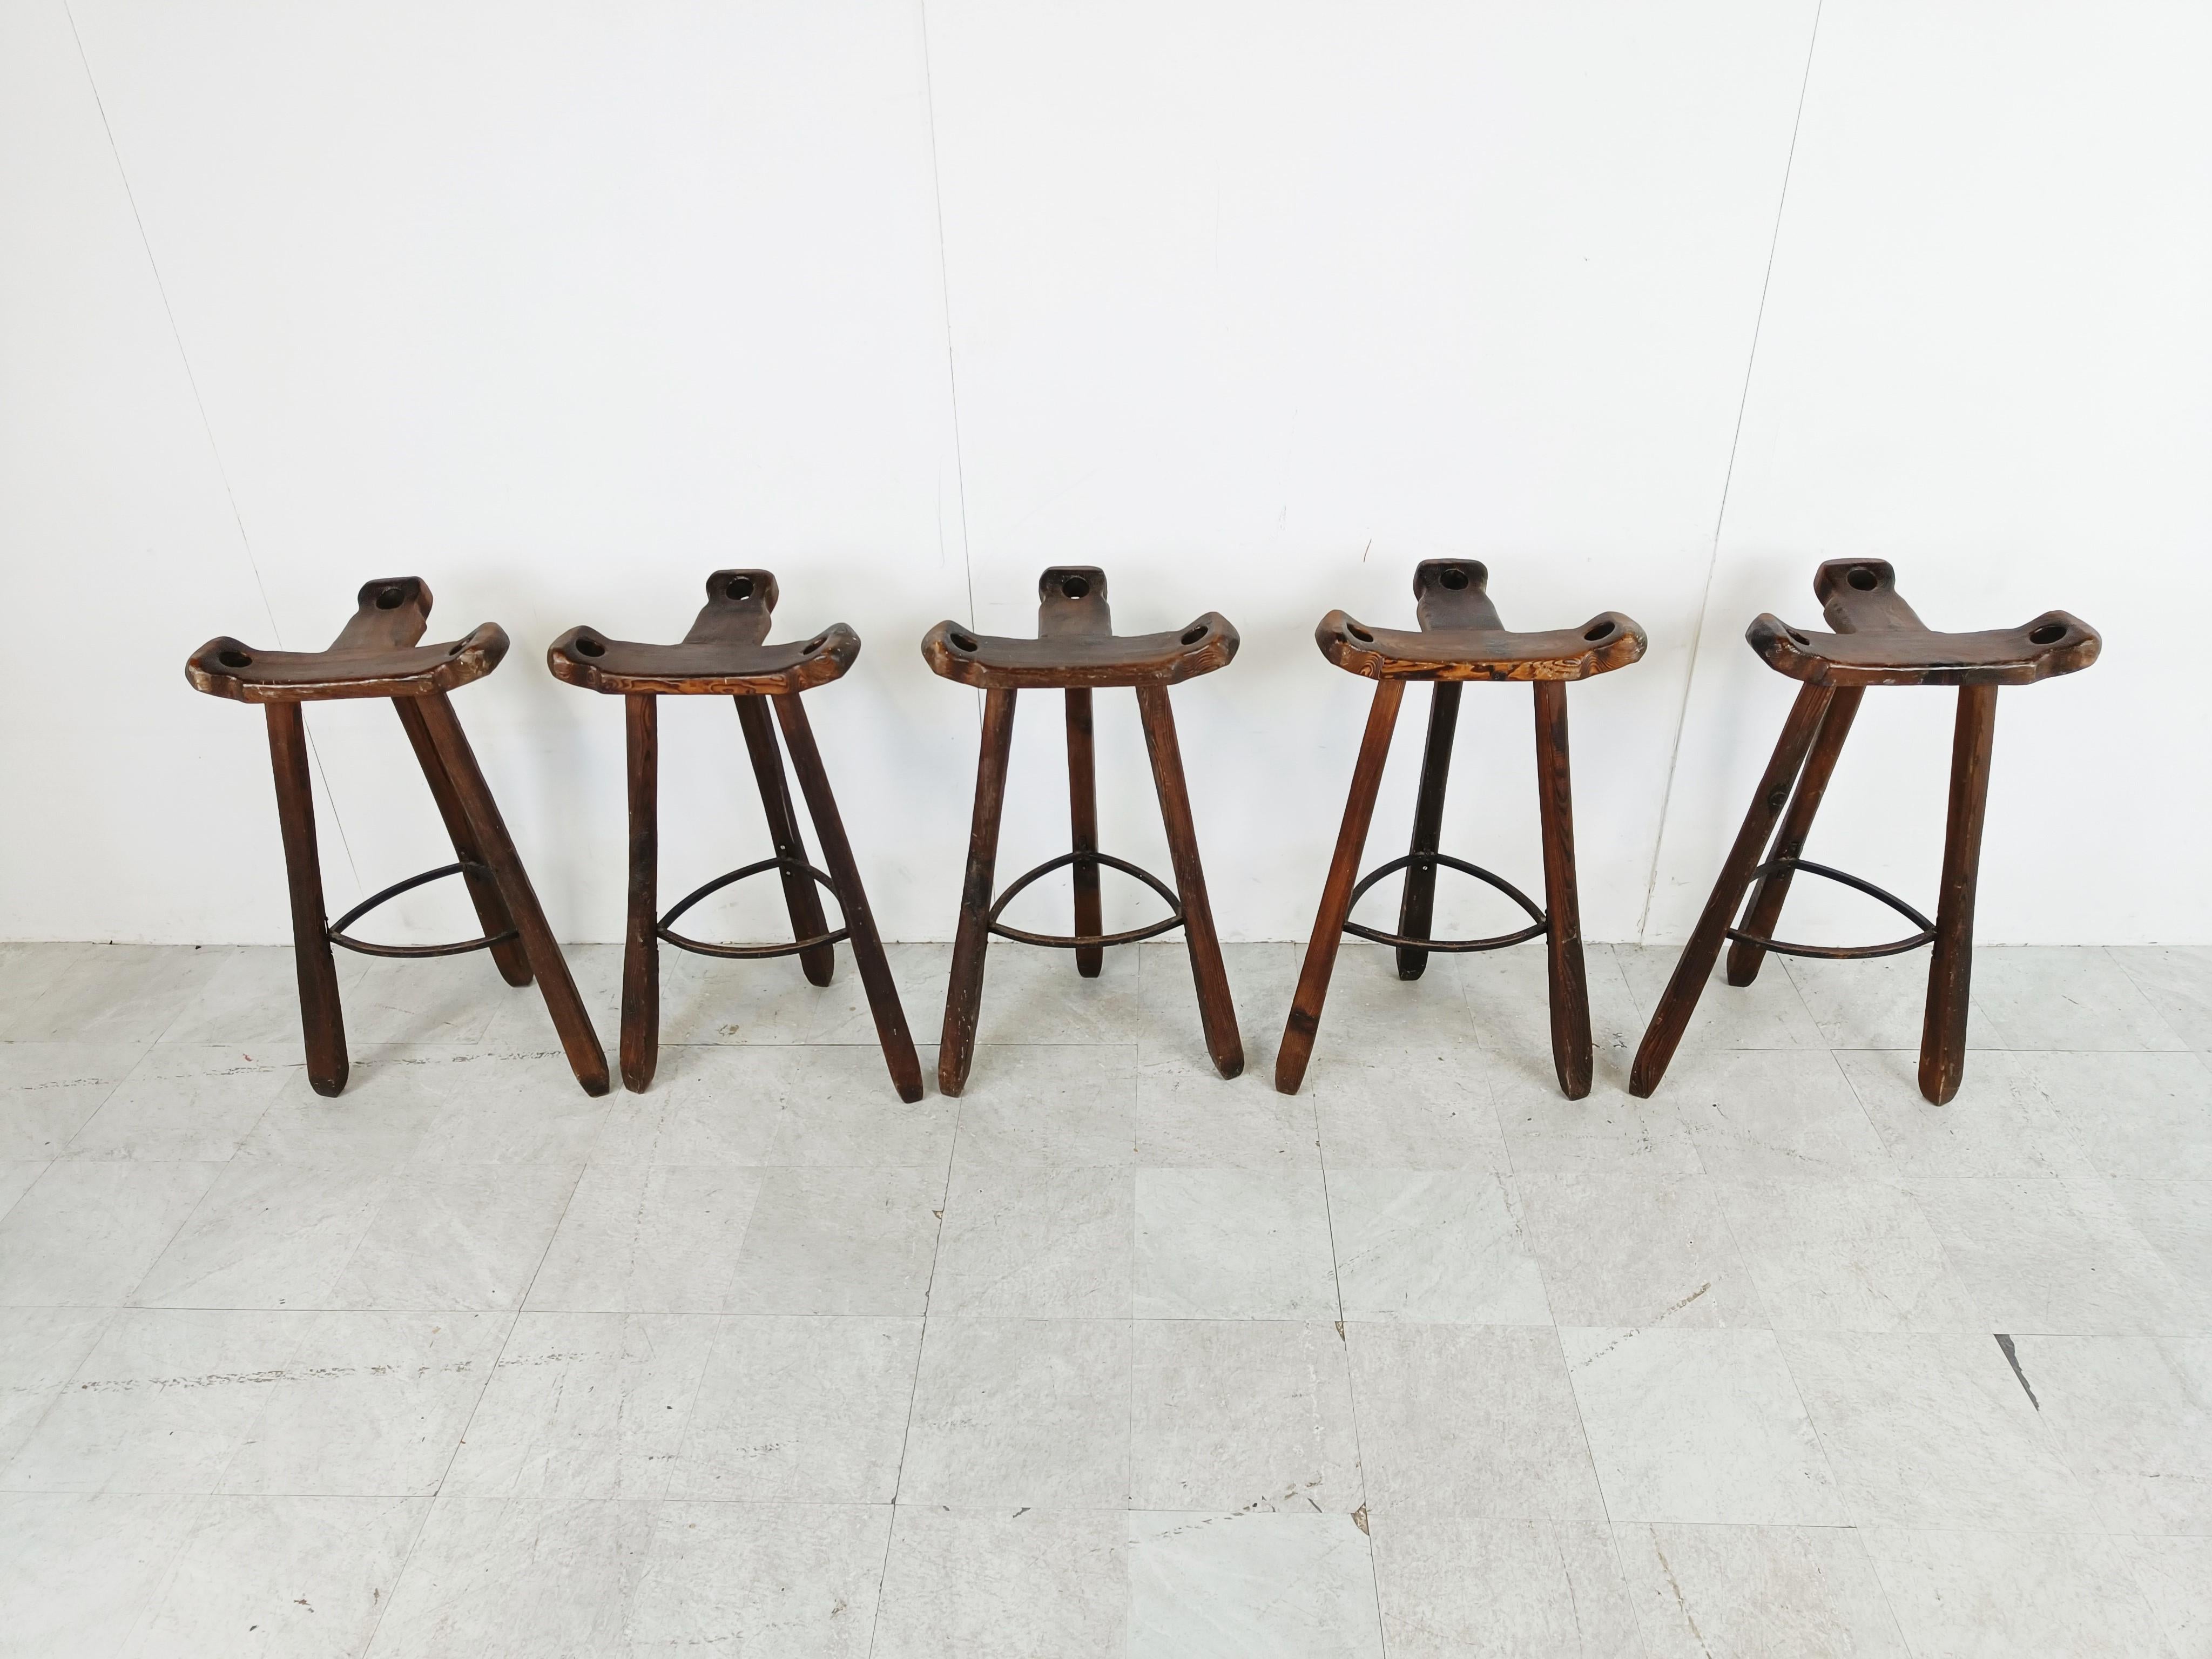 Beautiful handmade midcentury tripod bar stools with a steel footrest.

Gorgeous wooden pattern.

Good original condition.

1960s - Spain

Dimensions:
Height: 87cm/34.25